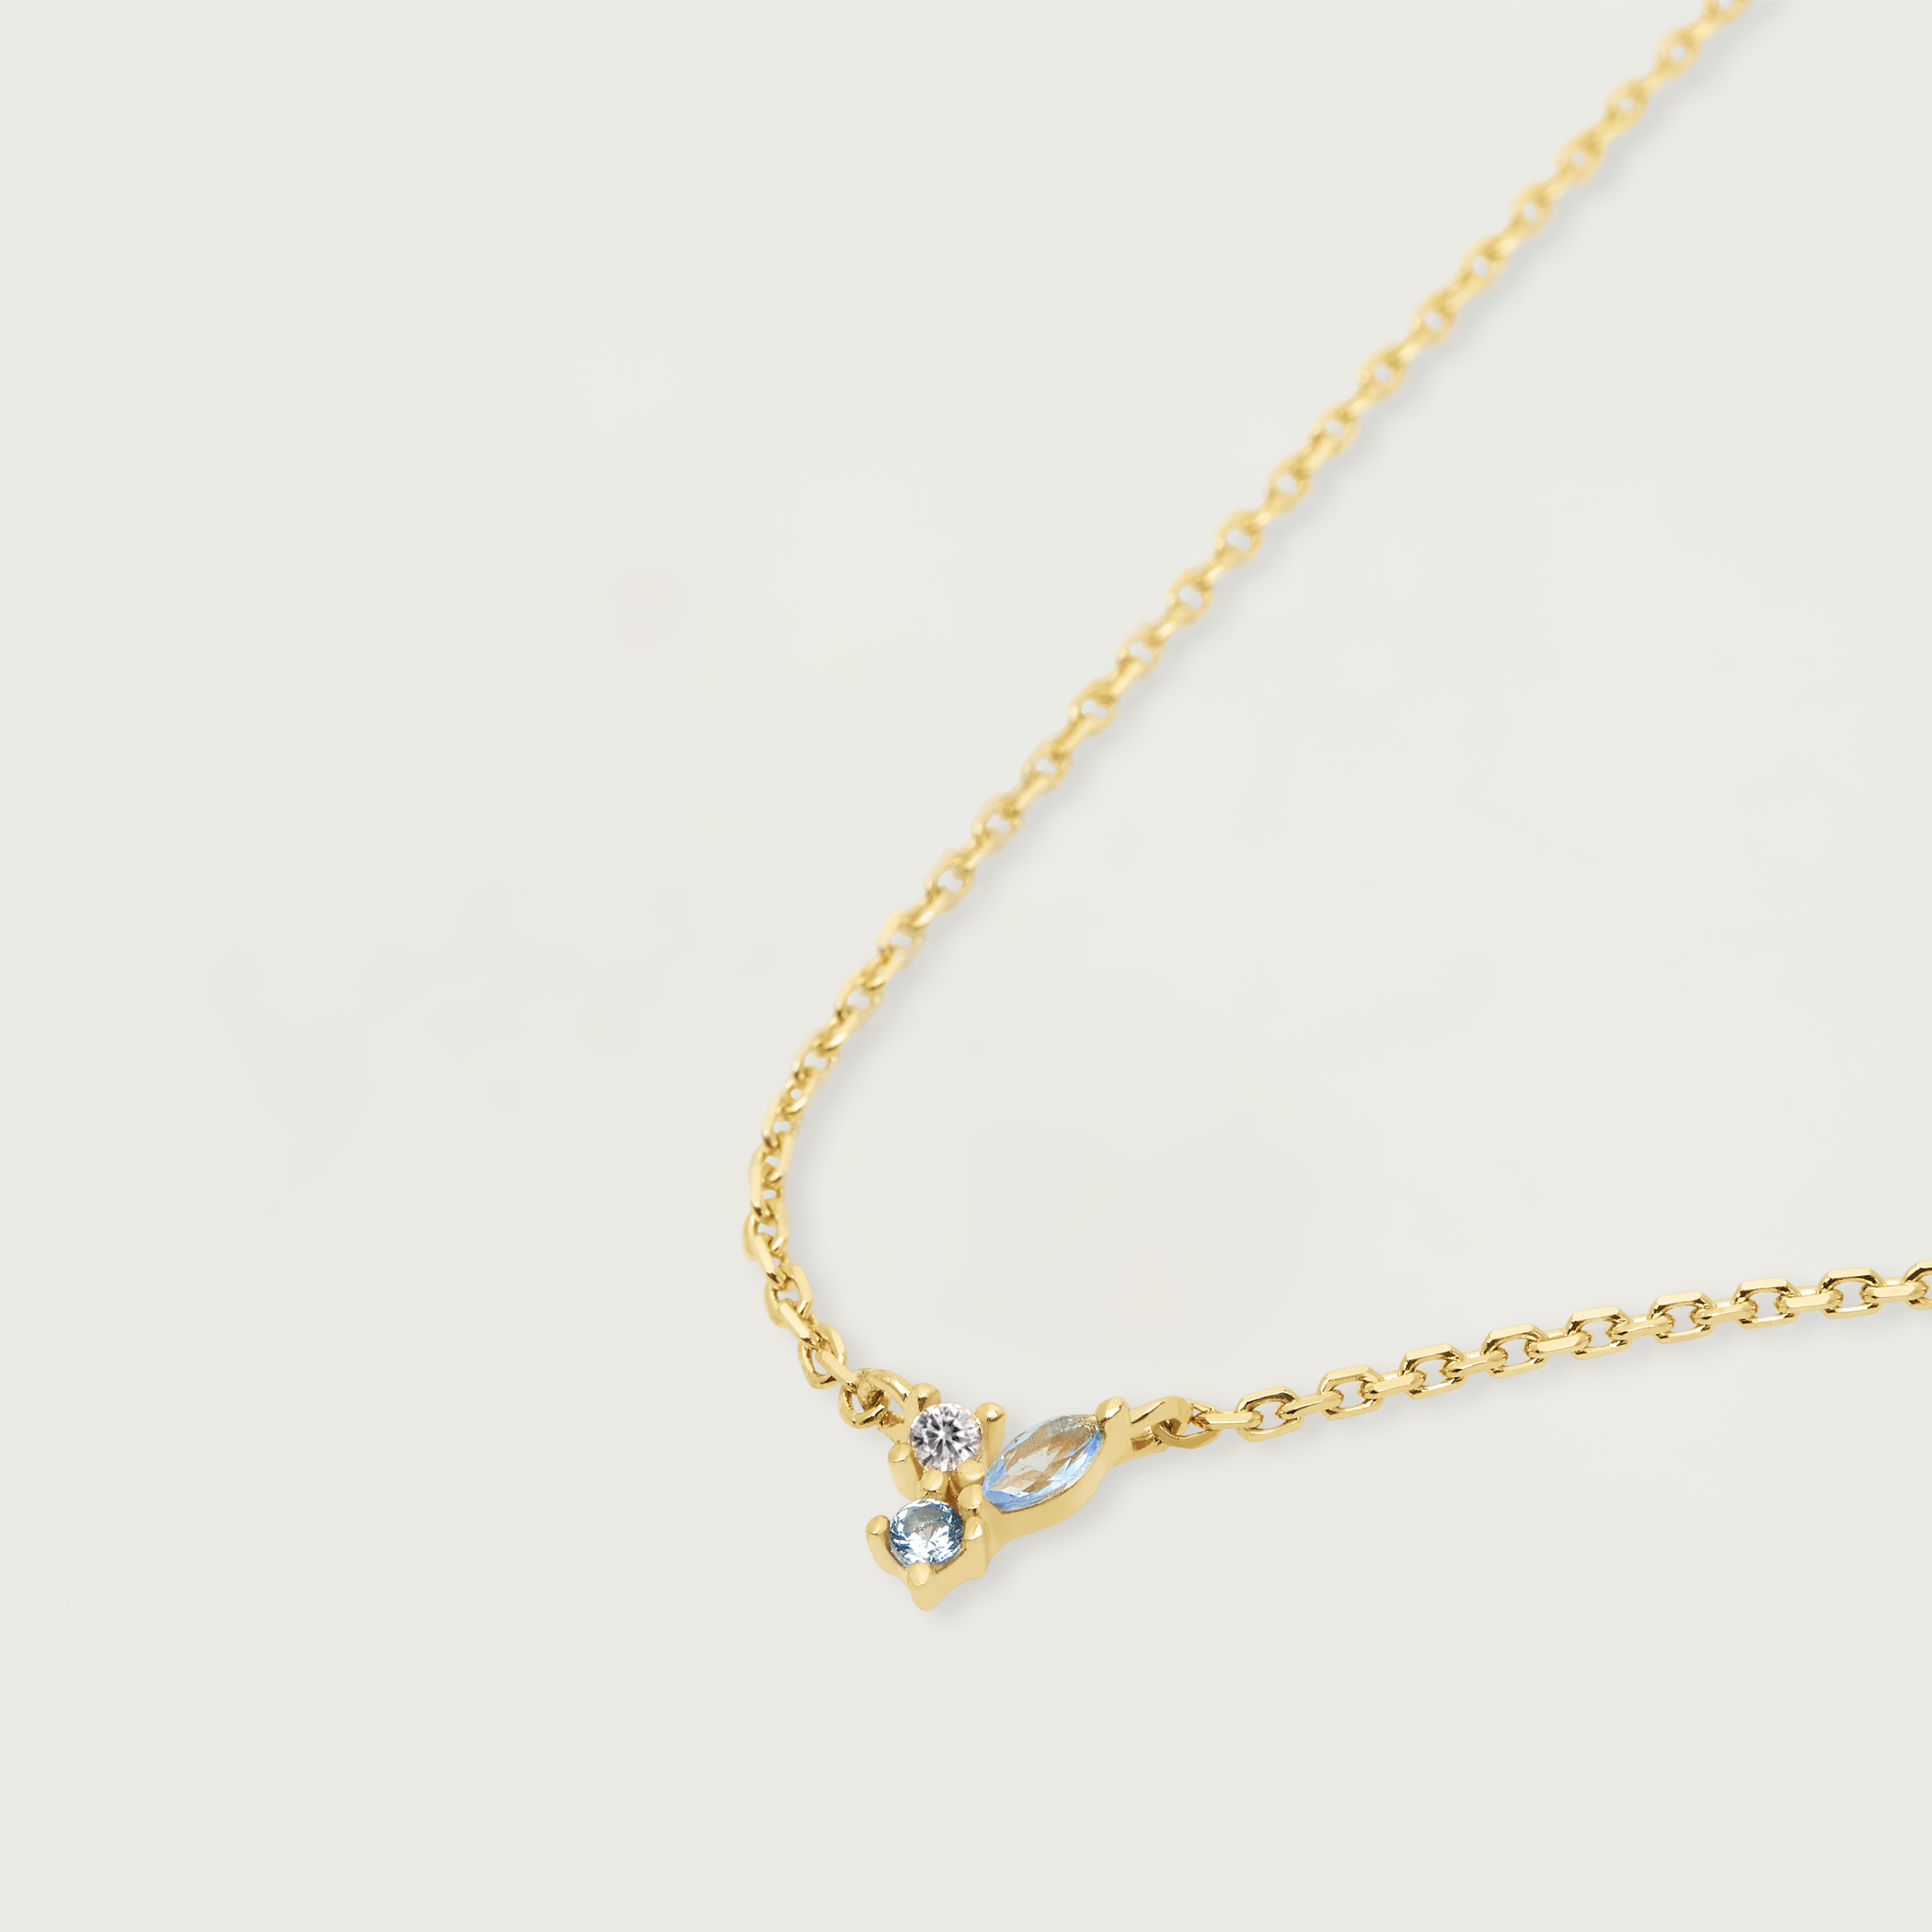 PDPAOLA - midnight gold blue necklace CO01-176-U atelier collection